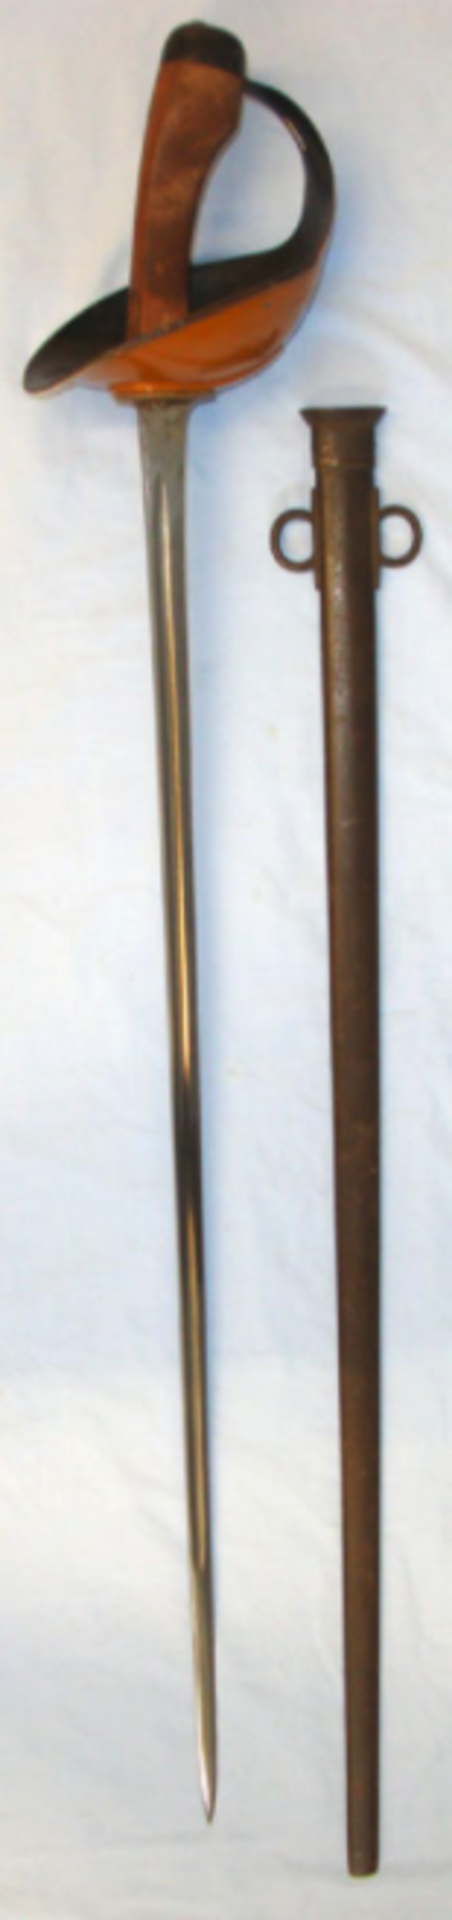 WW1 1915, 1908 Pattern British Heavy Cavalry Troopers Sword By Wilkinson Post WW1 Issue - Image 2 of 3